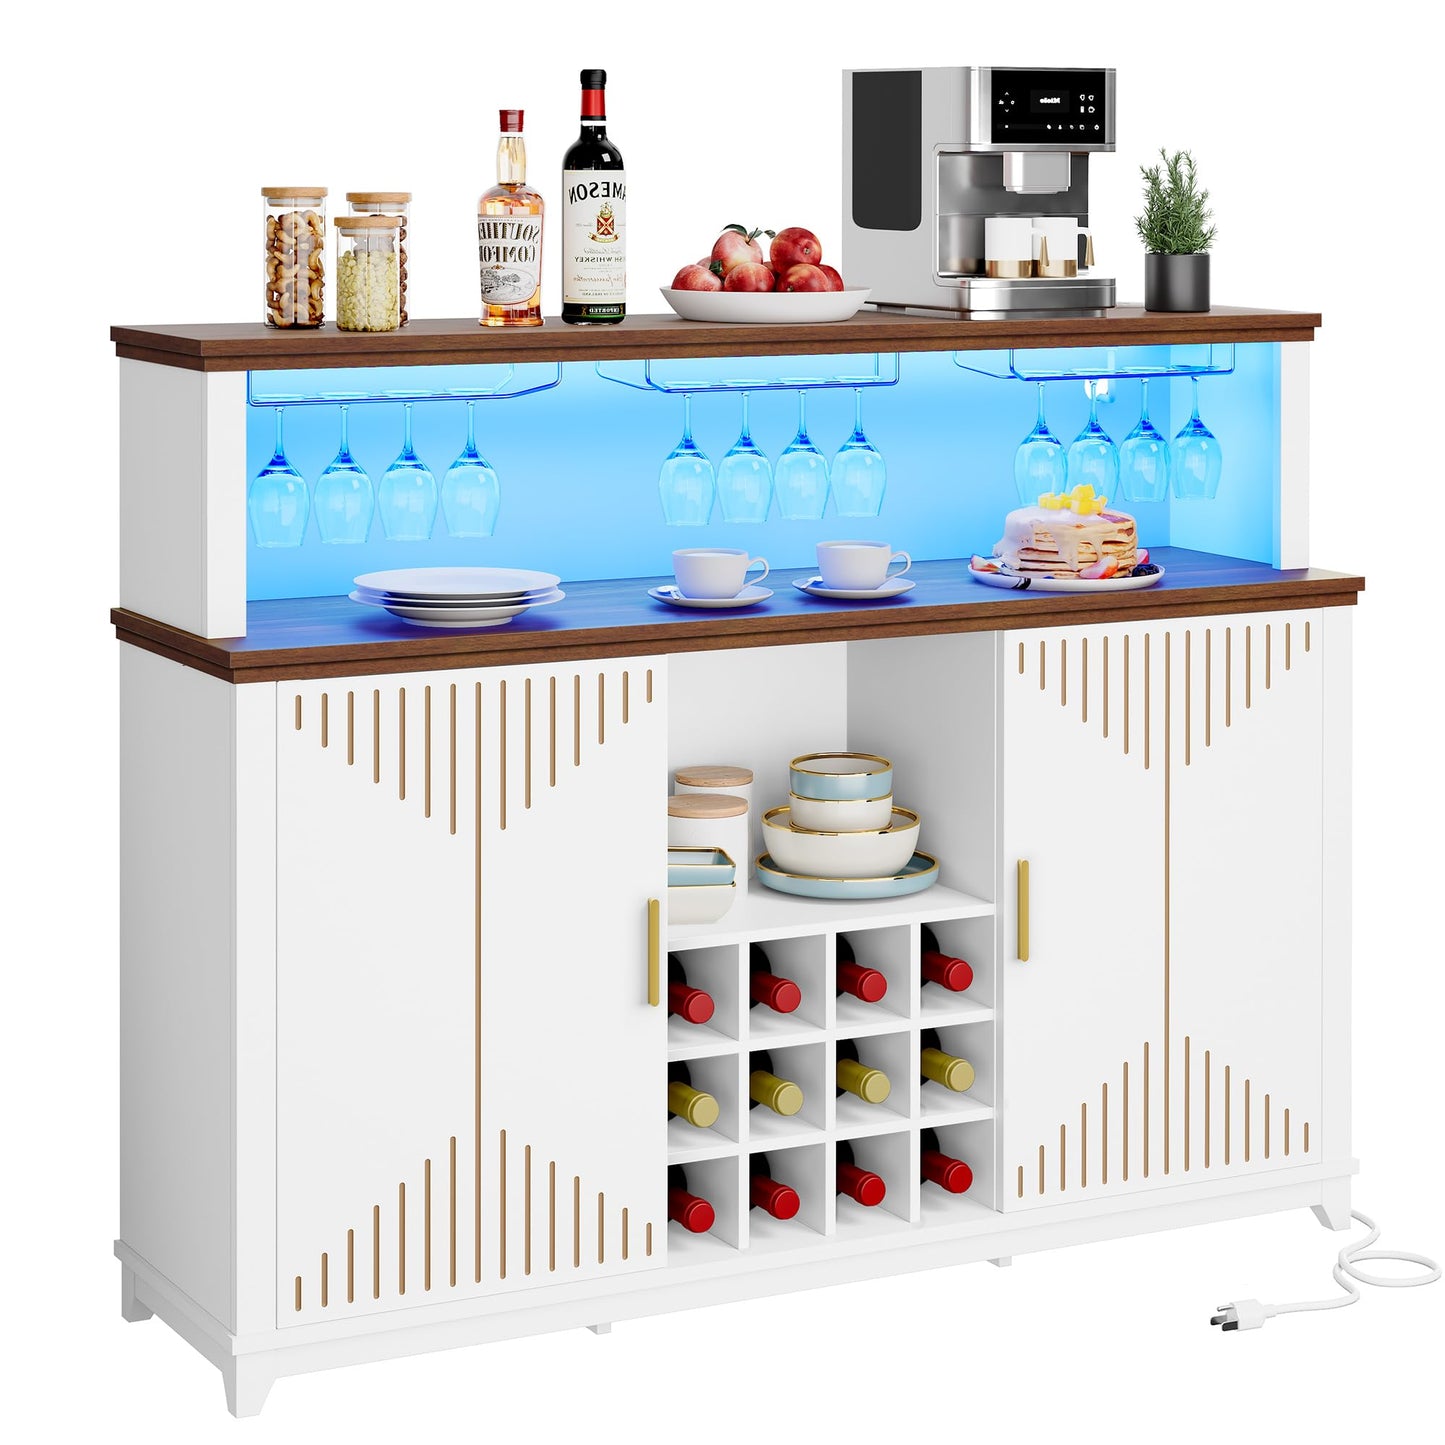 YITAHOME 55" Coffee Bar Cabinet with LED Lights & Power Outlets, Kitchen Buffet Cabinet with Door Wine and Glass Rack, Home Liquor Bar Cabinet with Storage Shelves for Kitchen, Living Room, White